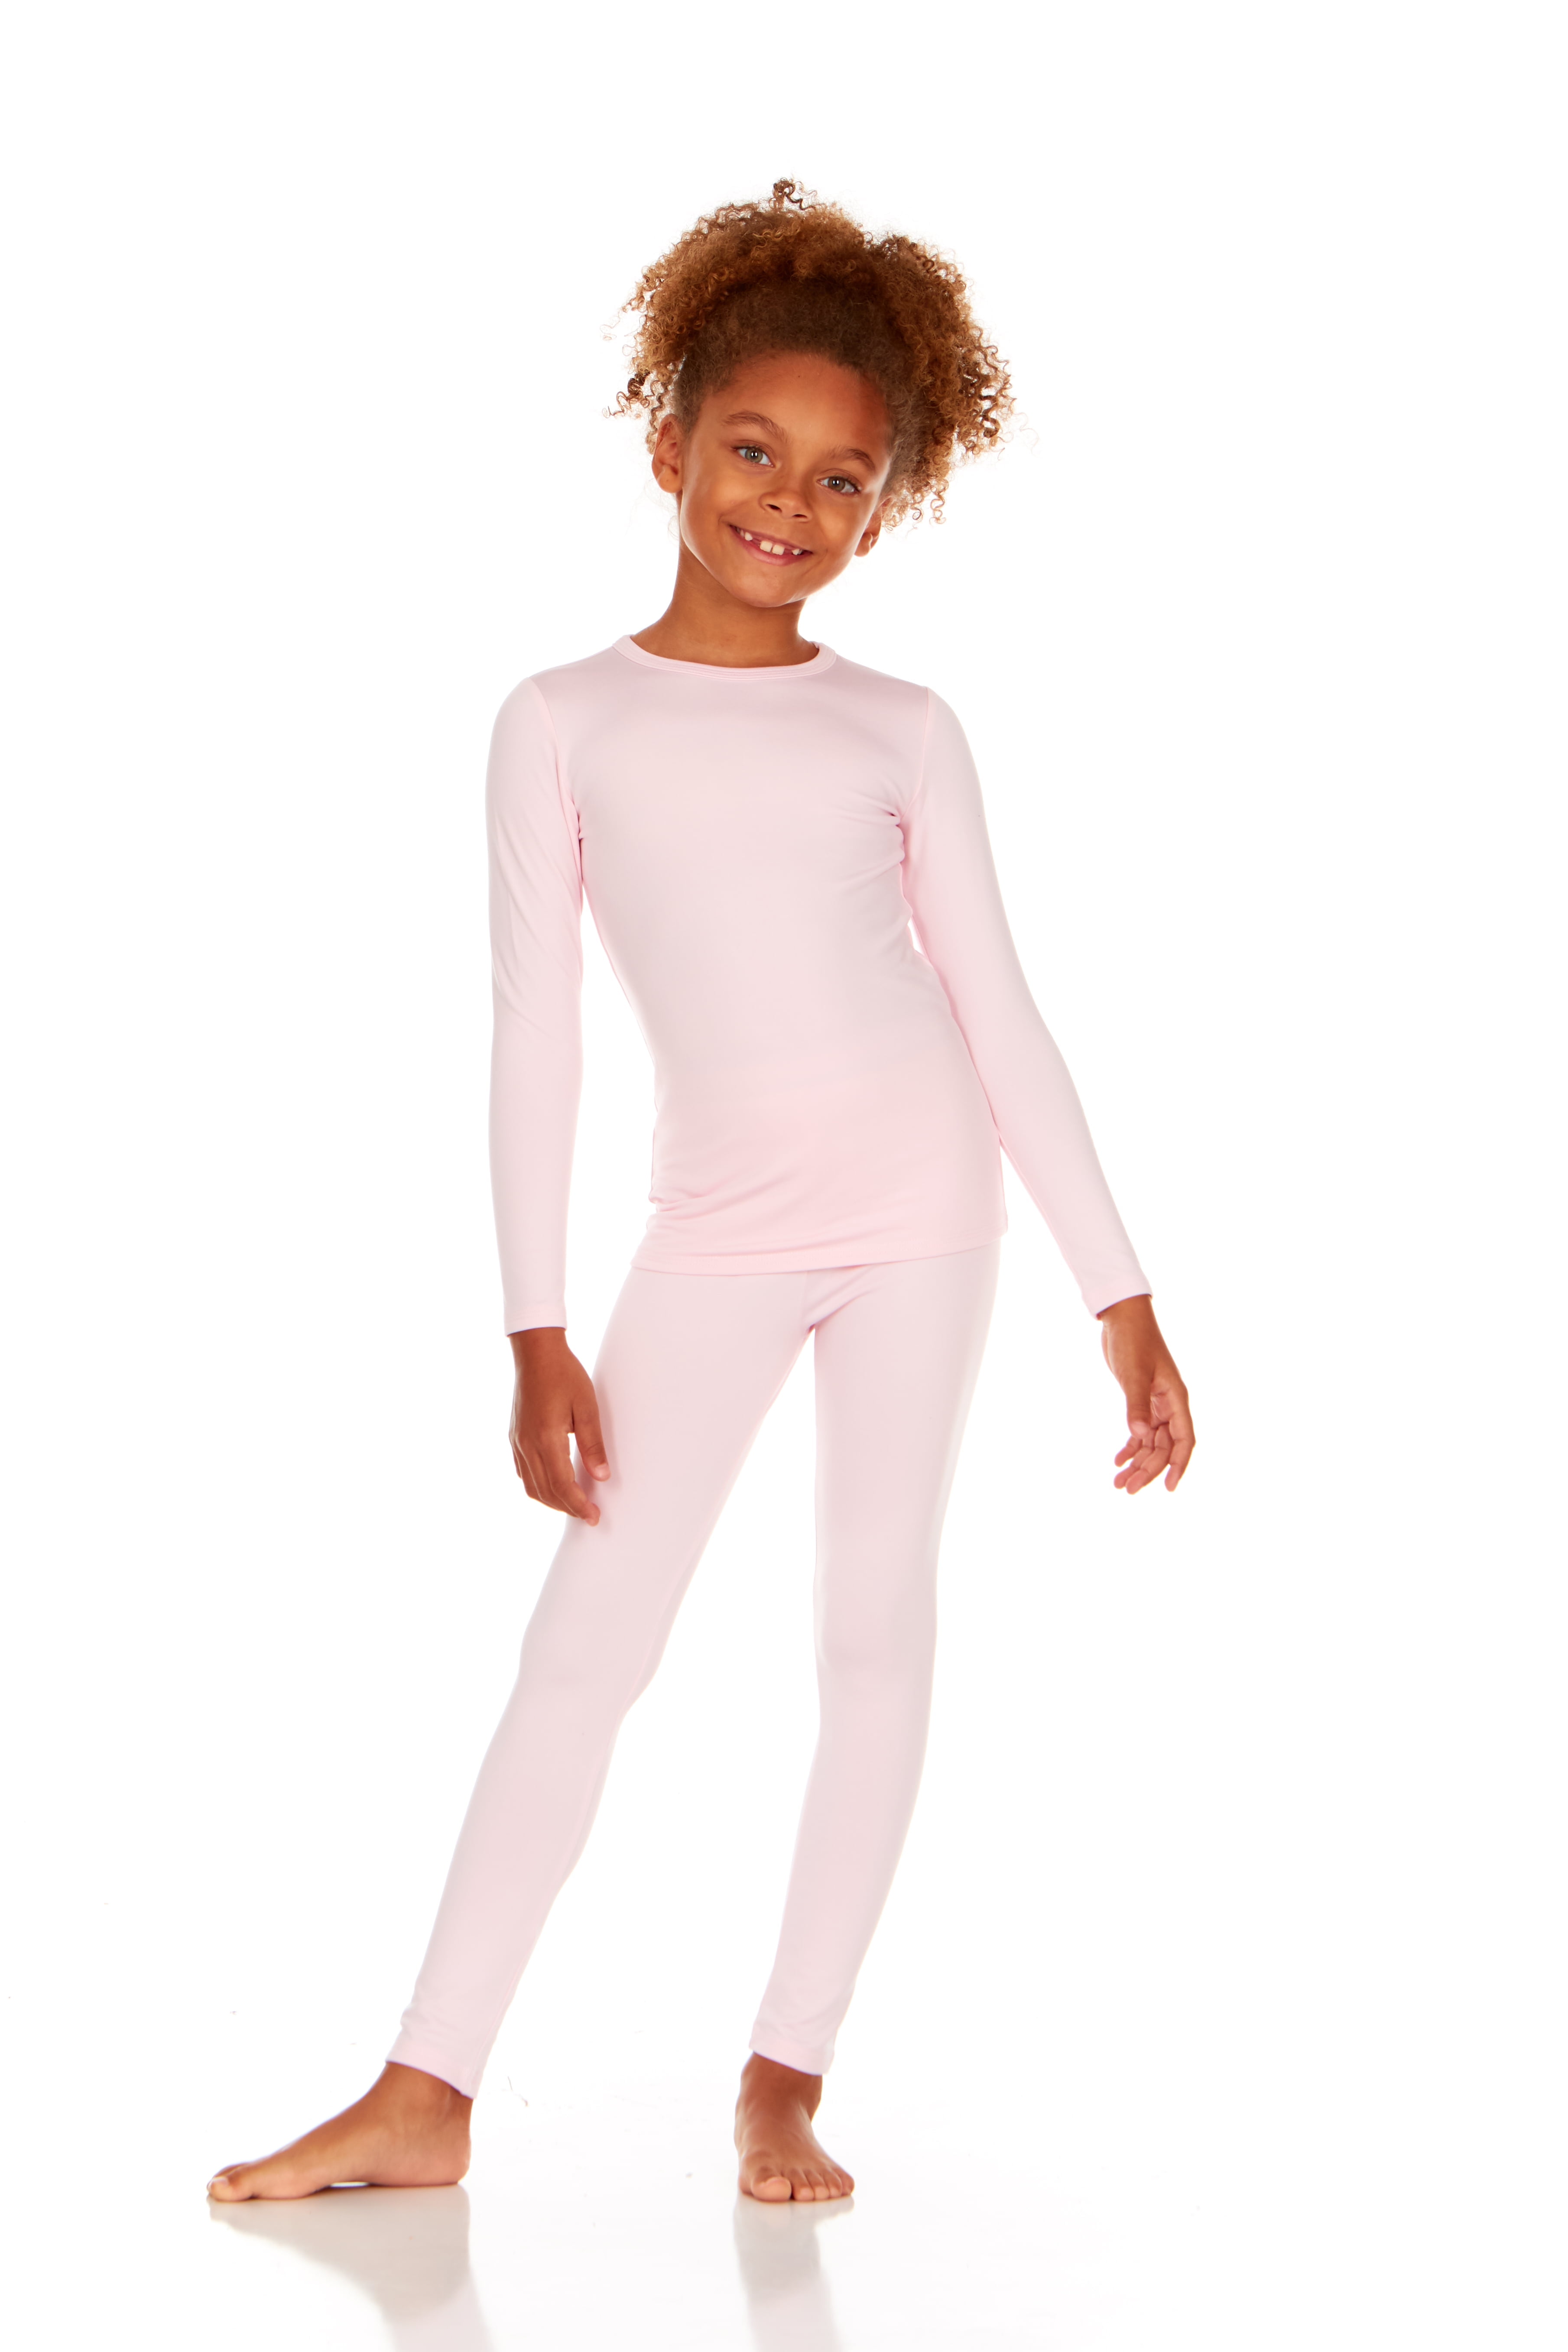 Thermajane Girl's Ultra Soft Thermal Underwear Long Johns Set with